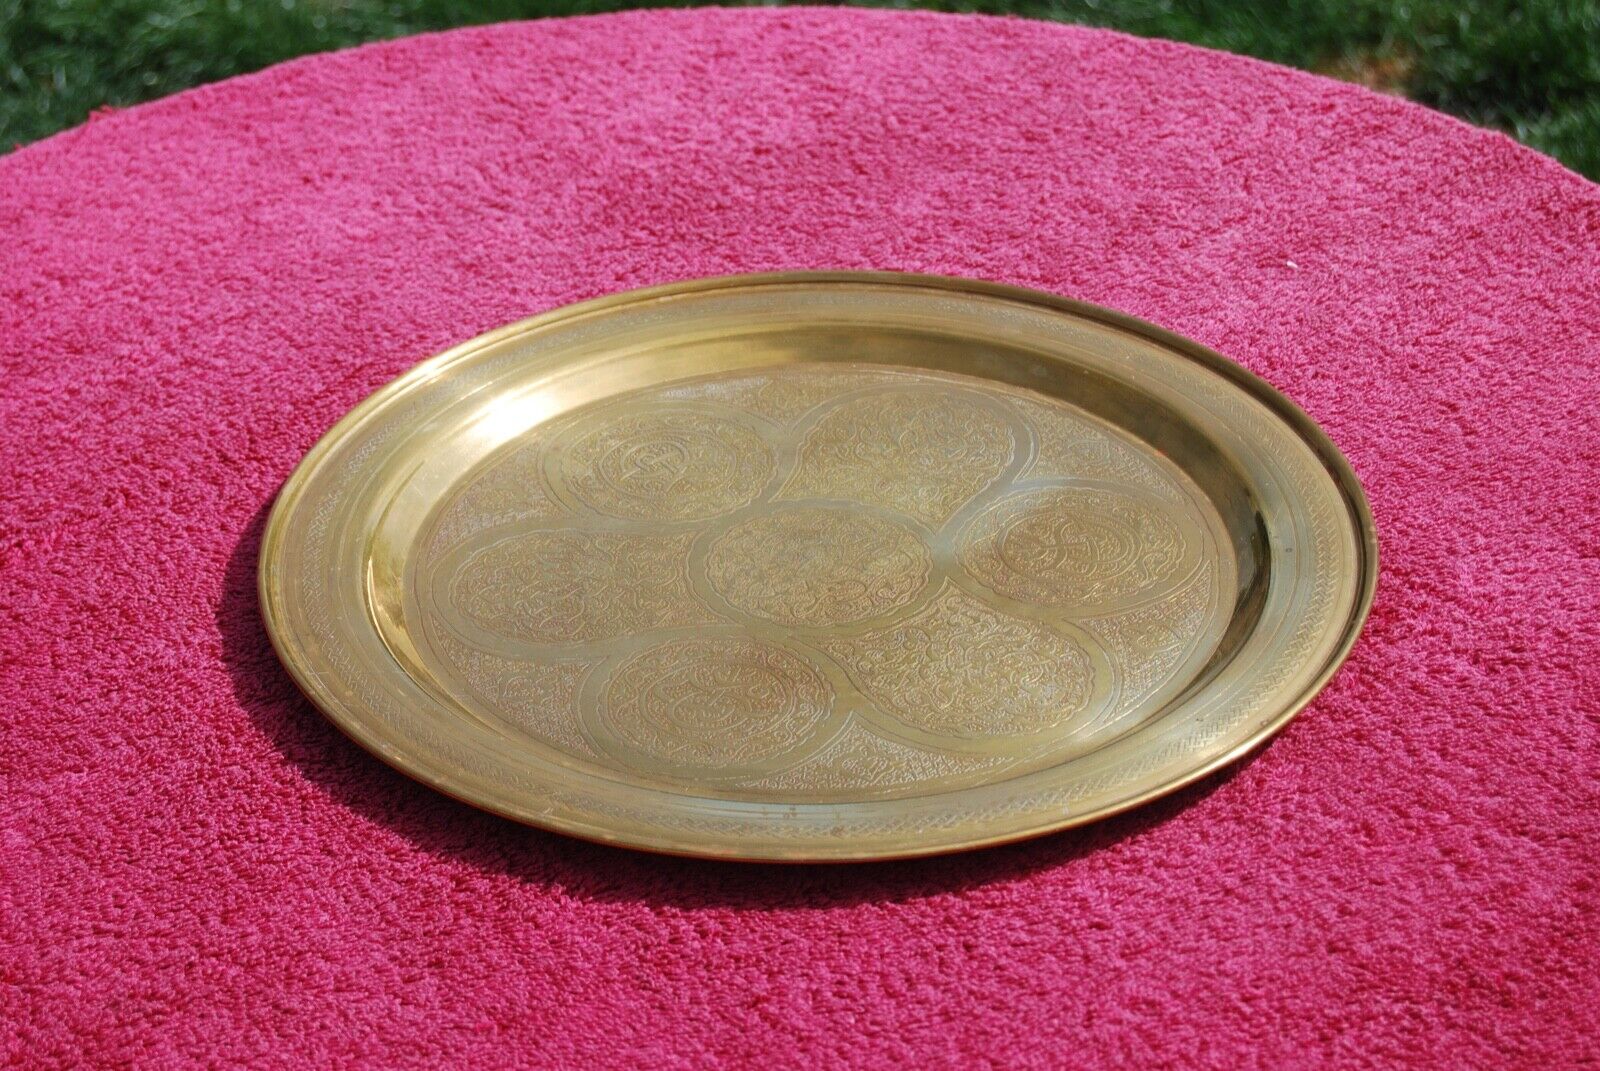 Antique Valuations: Engraved or etched brass tray or plate dish charger